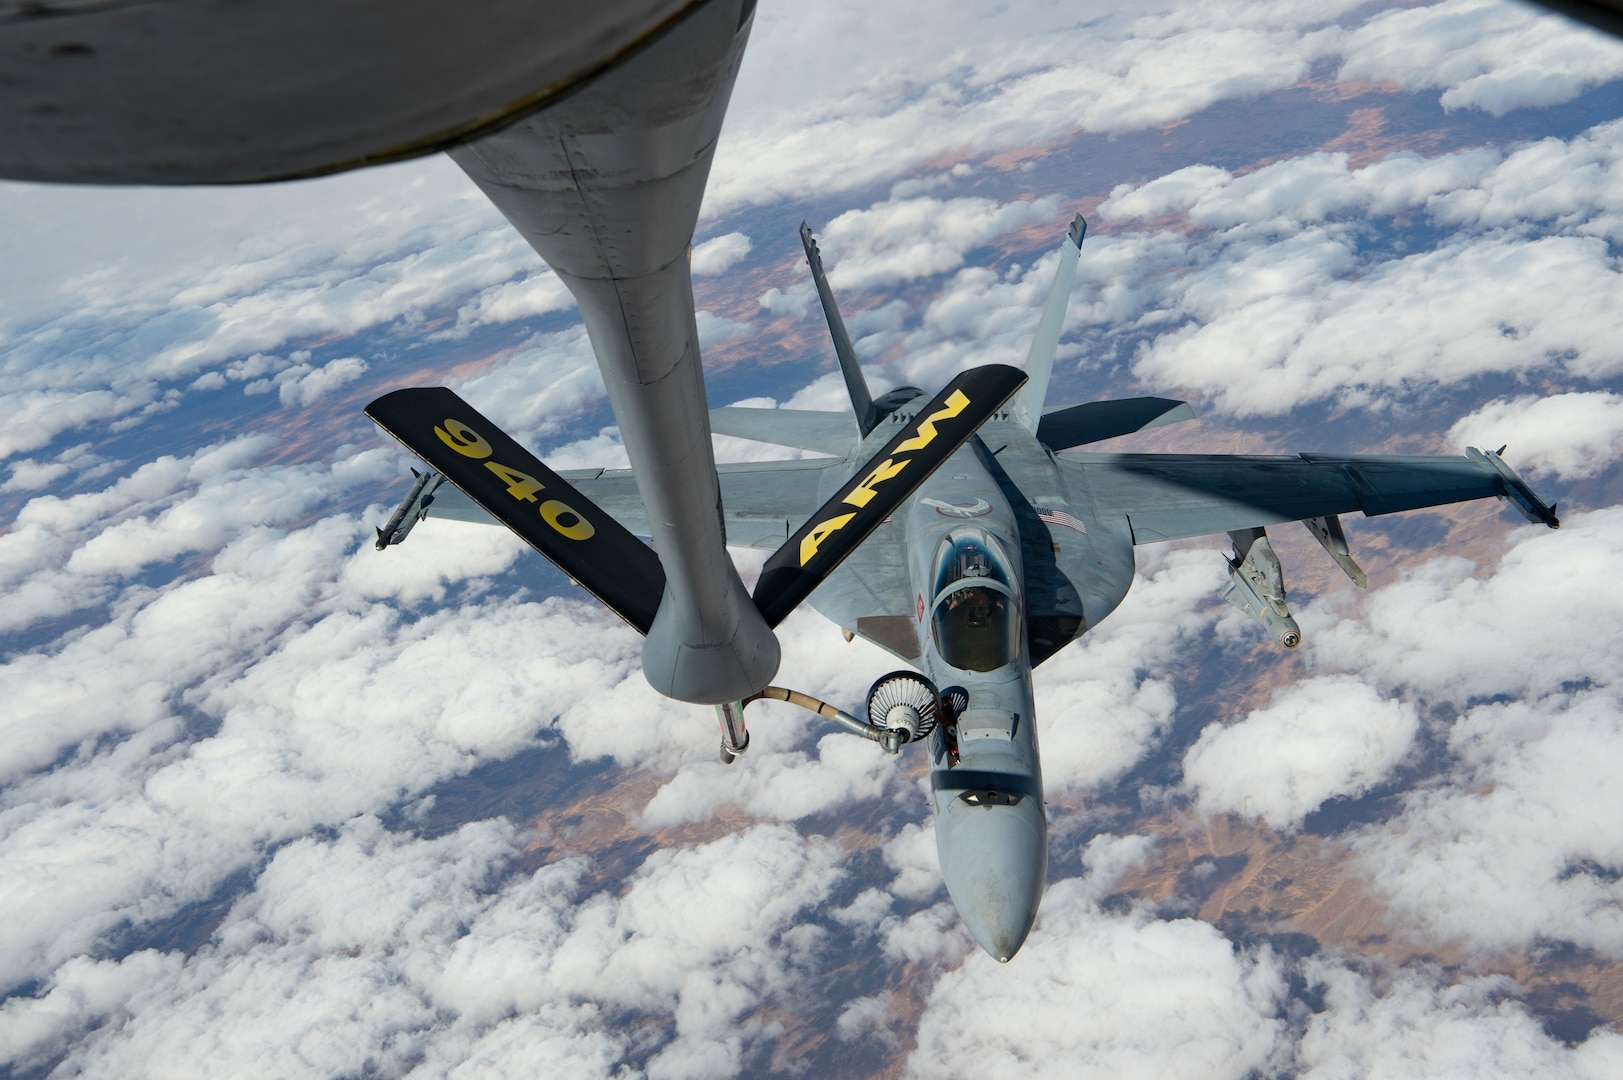 A U.S. Navy F/A-18 Super Hornet receives fuel from a KC-135 Stratotanker assigned to the 28th Expeditionary Air Refueling Squadron over Afghanistan, Jan. 14, 2020.